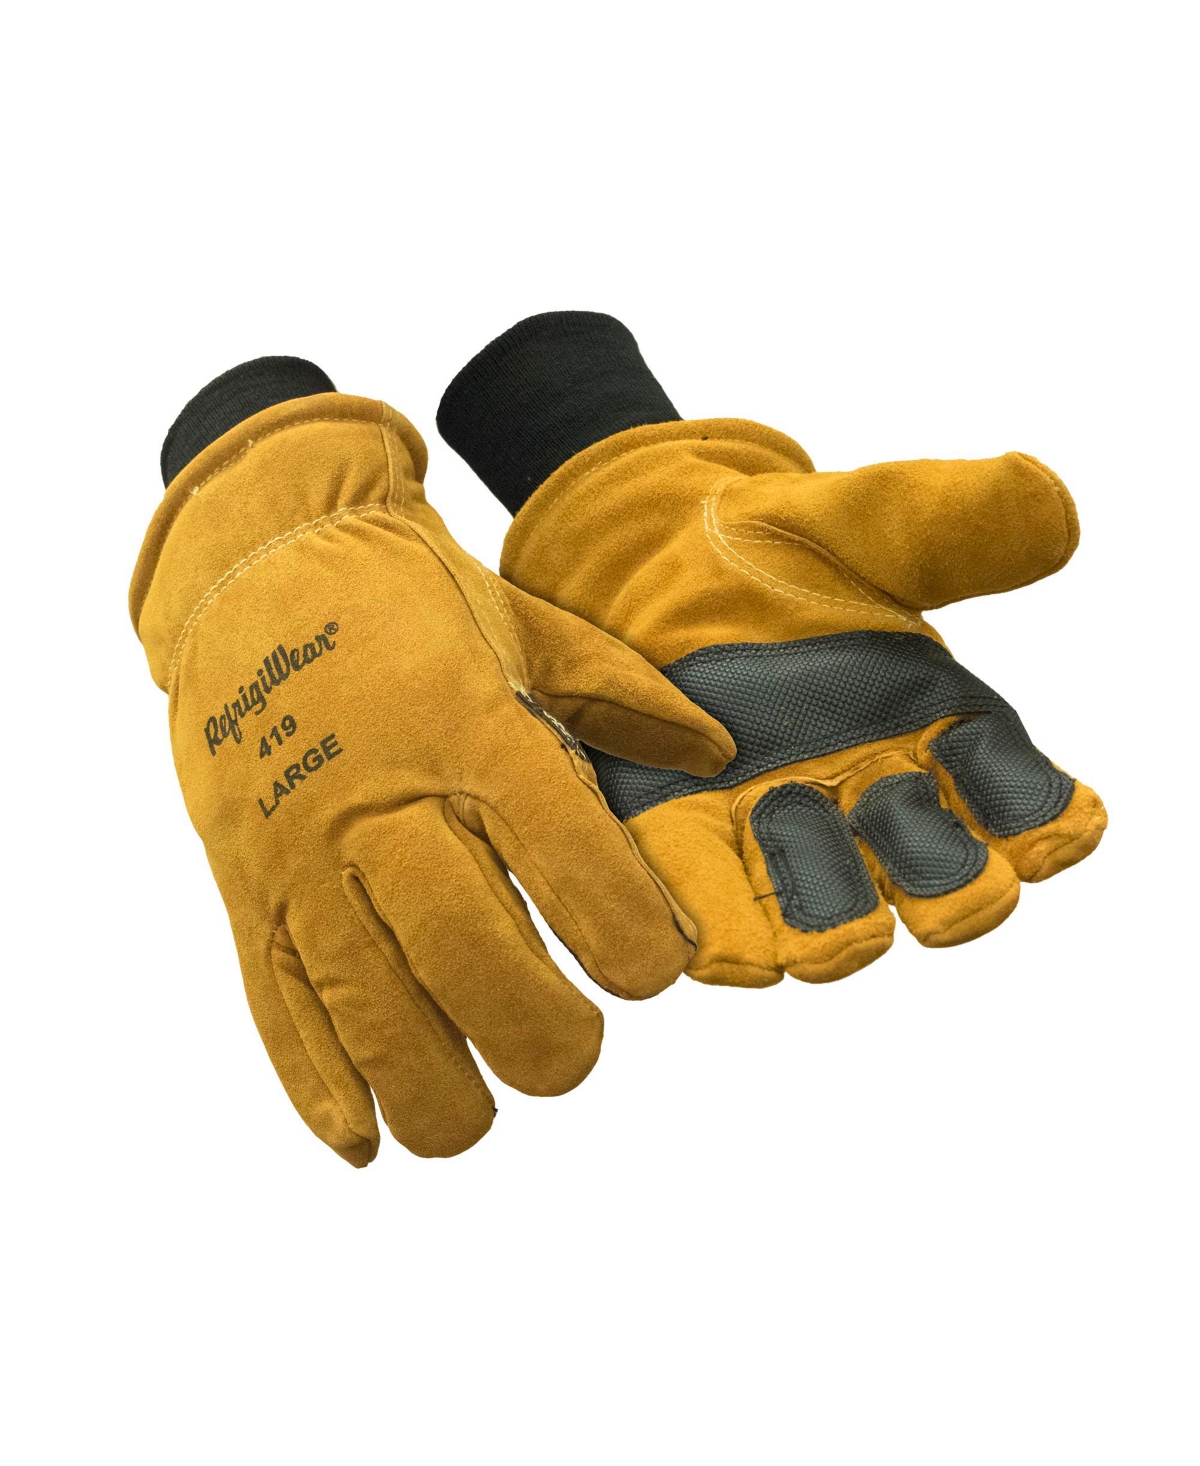 Men's Warm Double Insulated Leather Work Gloves with Abrasion Pads - Gold